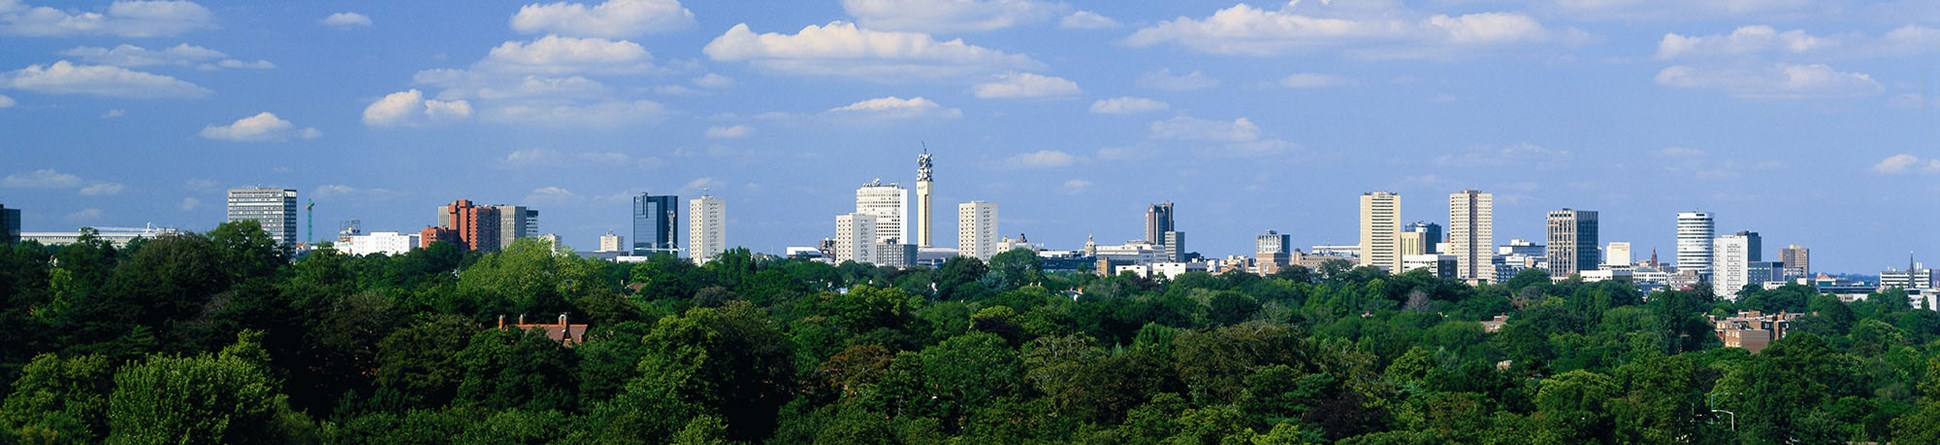 City skyline showing an extensive tree canopy in the Edgbaston Conservation Area